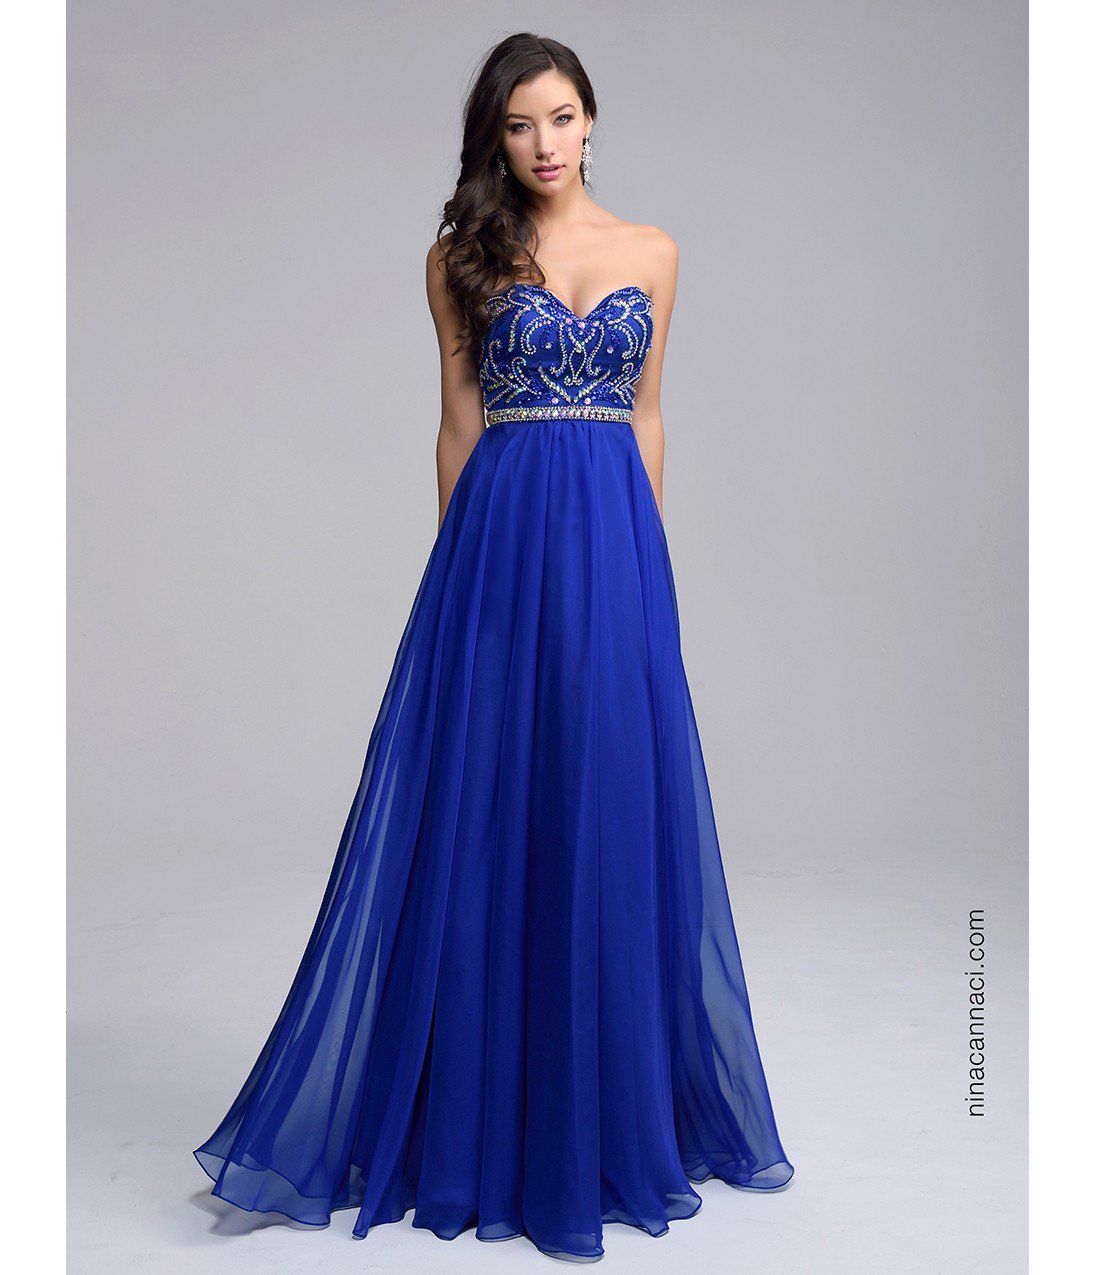 Style 1201 Nina Canacci Size 6 Royal Blue A-line Dress on Queenly